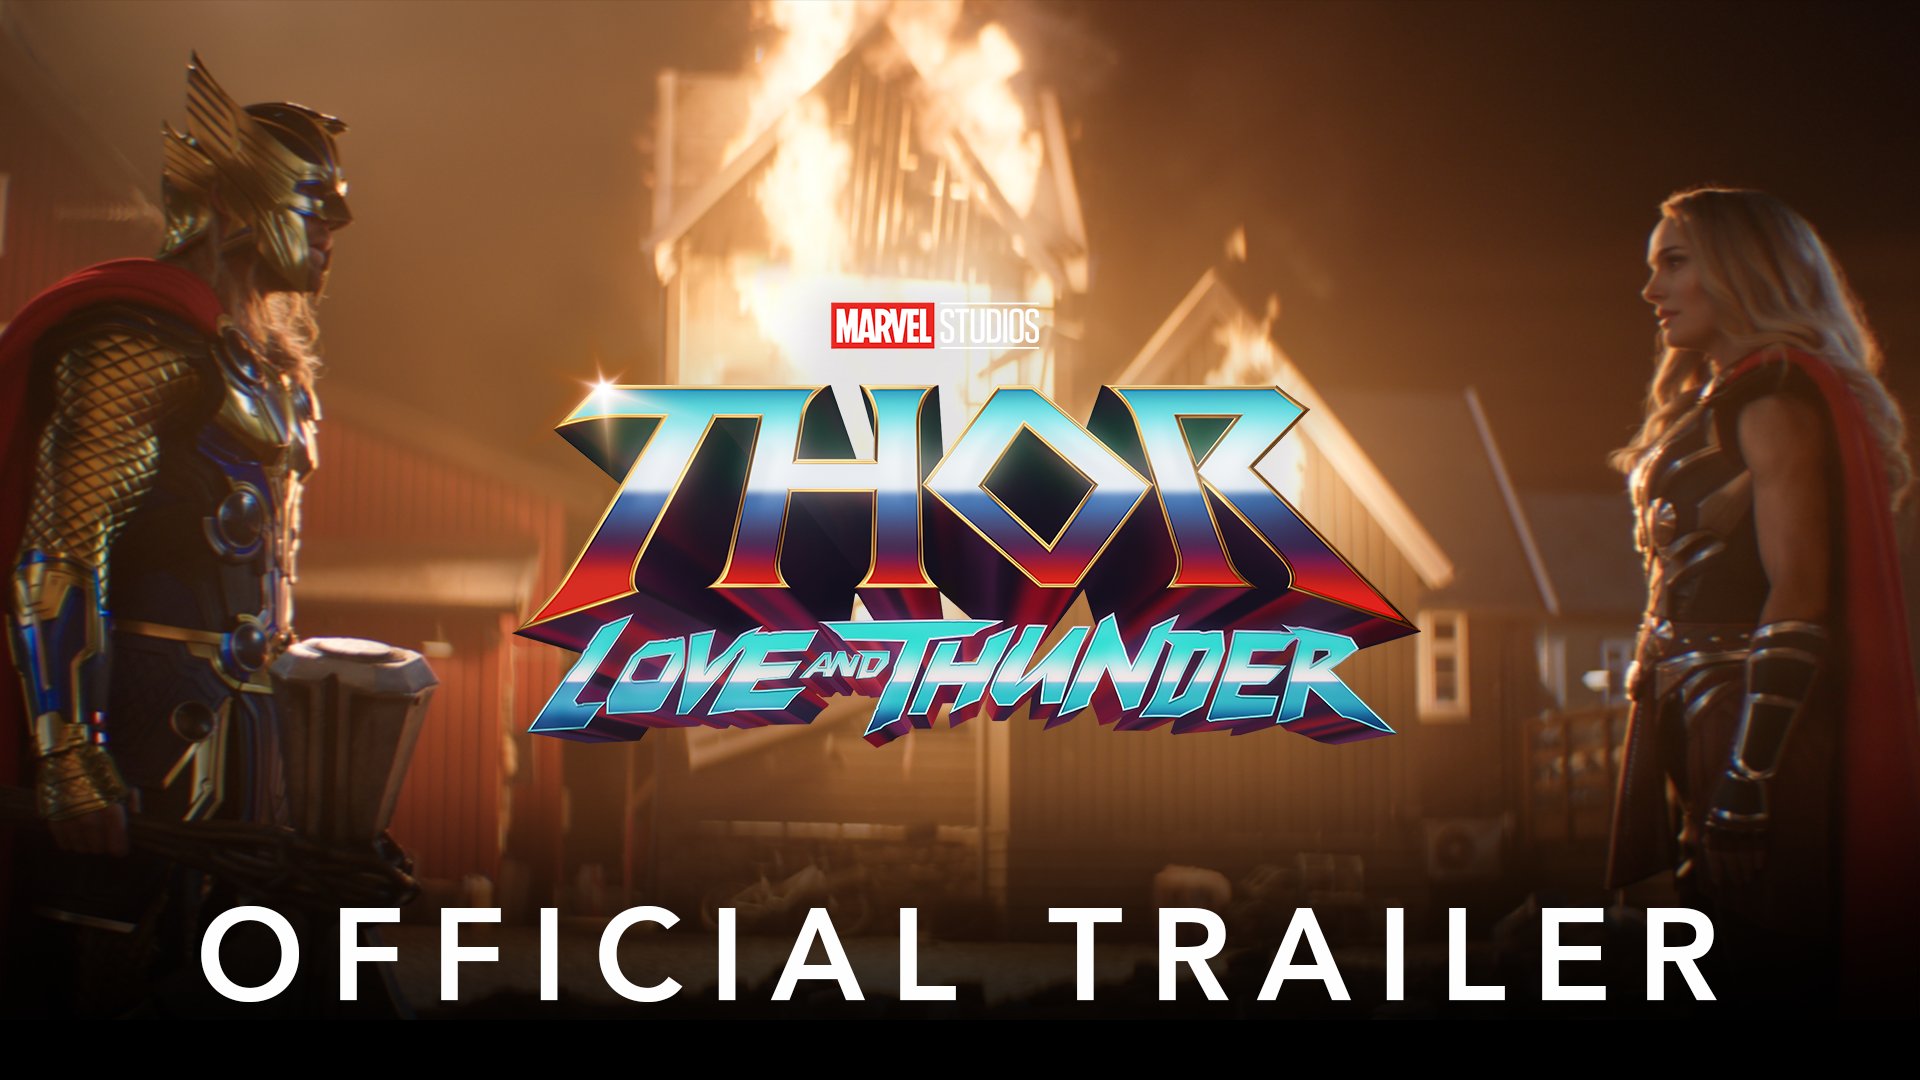 DiscussingFilm on X: #ThorLoveAndThunder is currently at 68% on